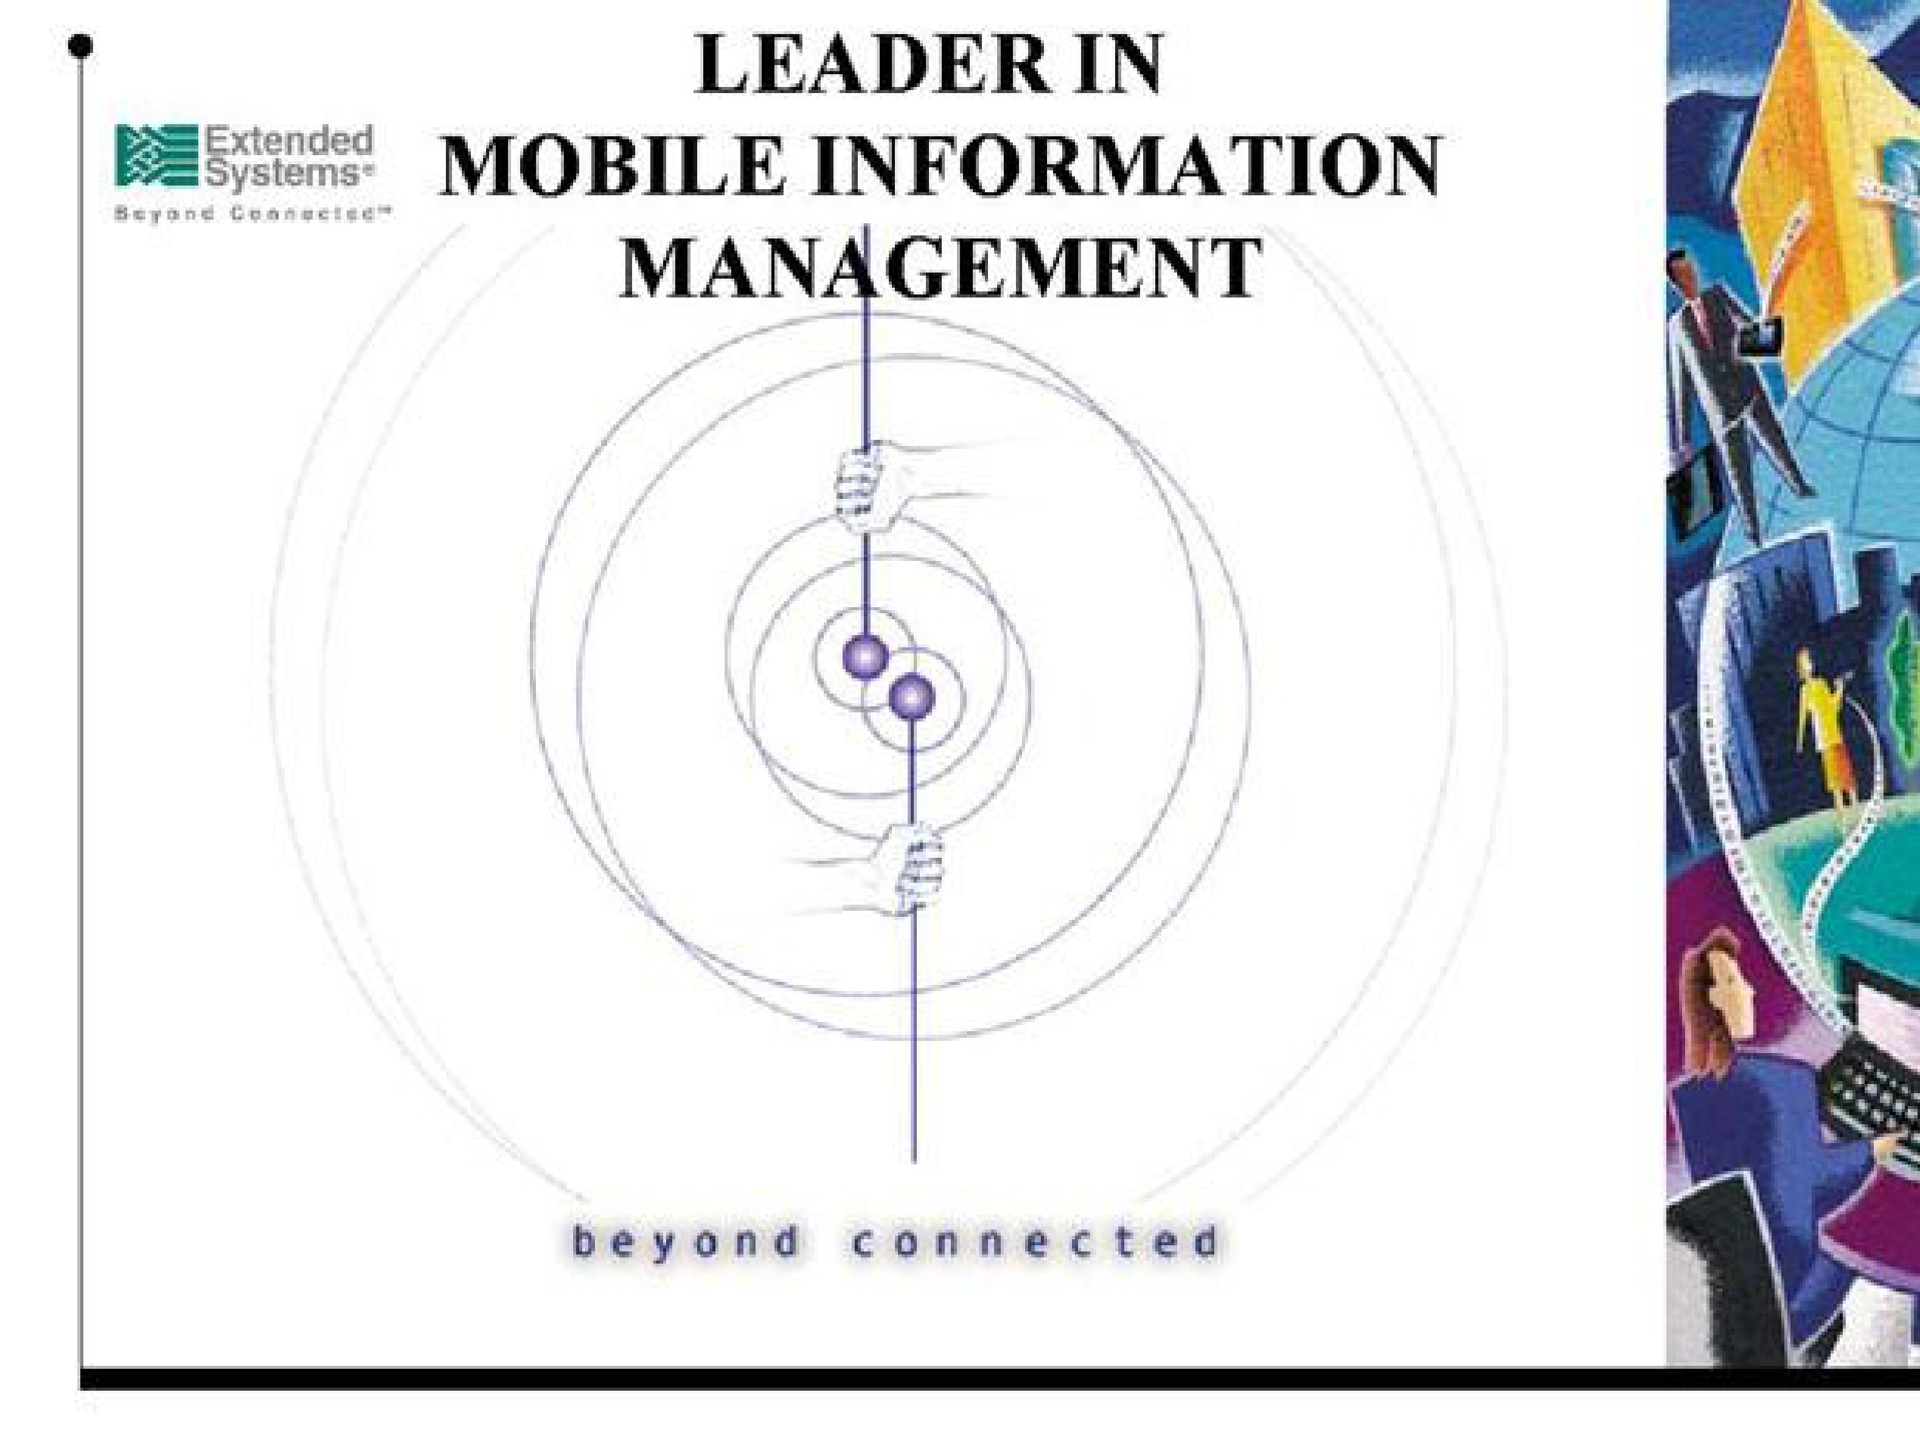 leader in mobile information management | Extended Systems